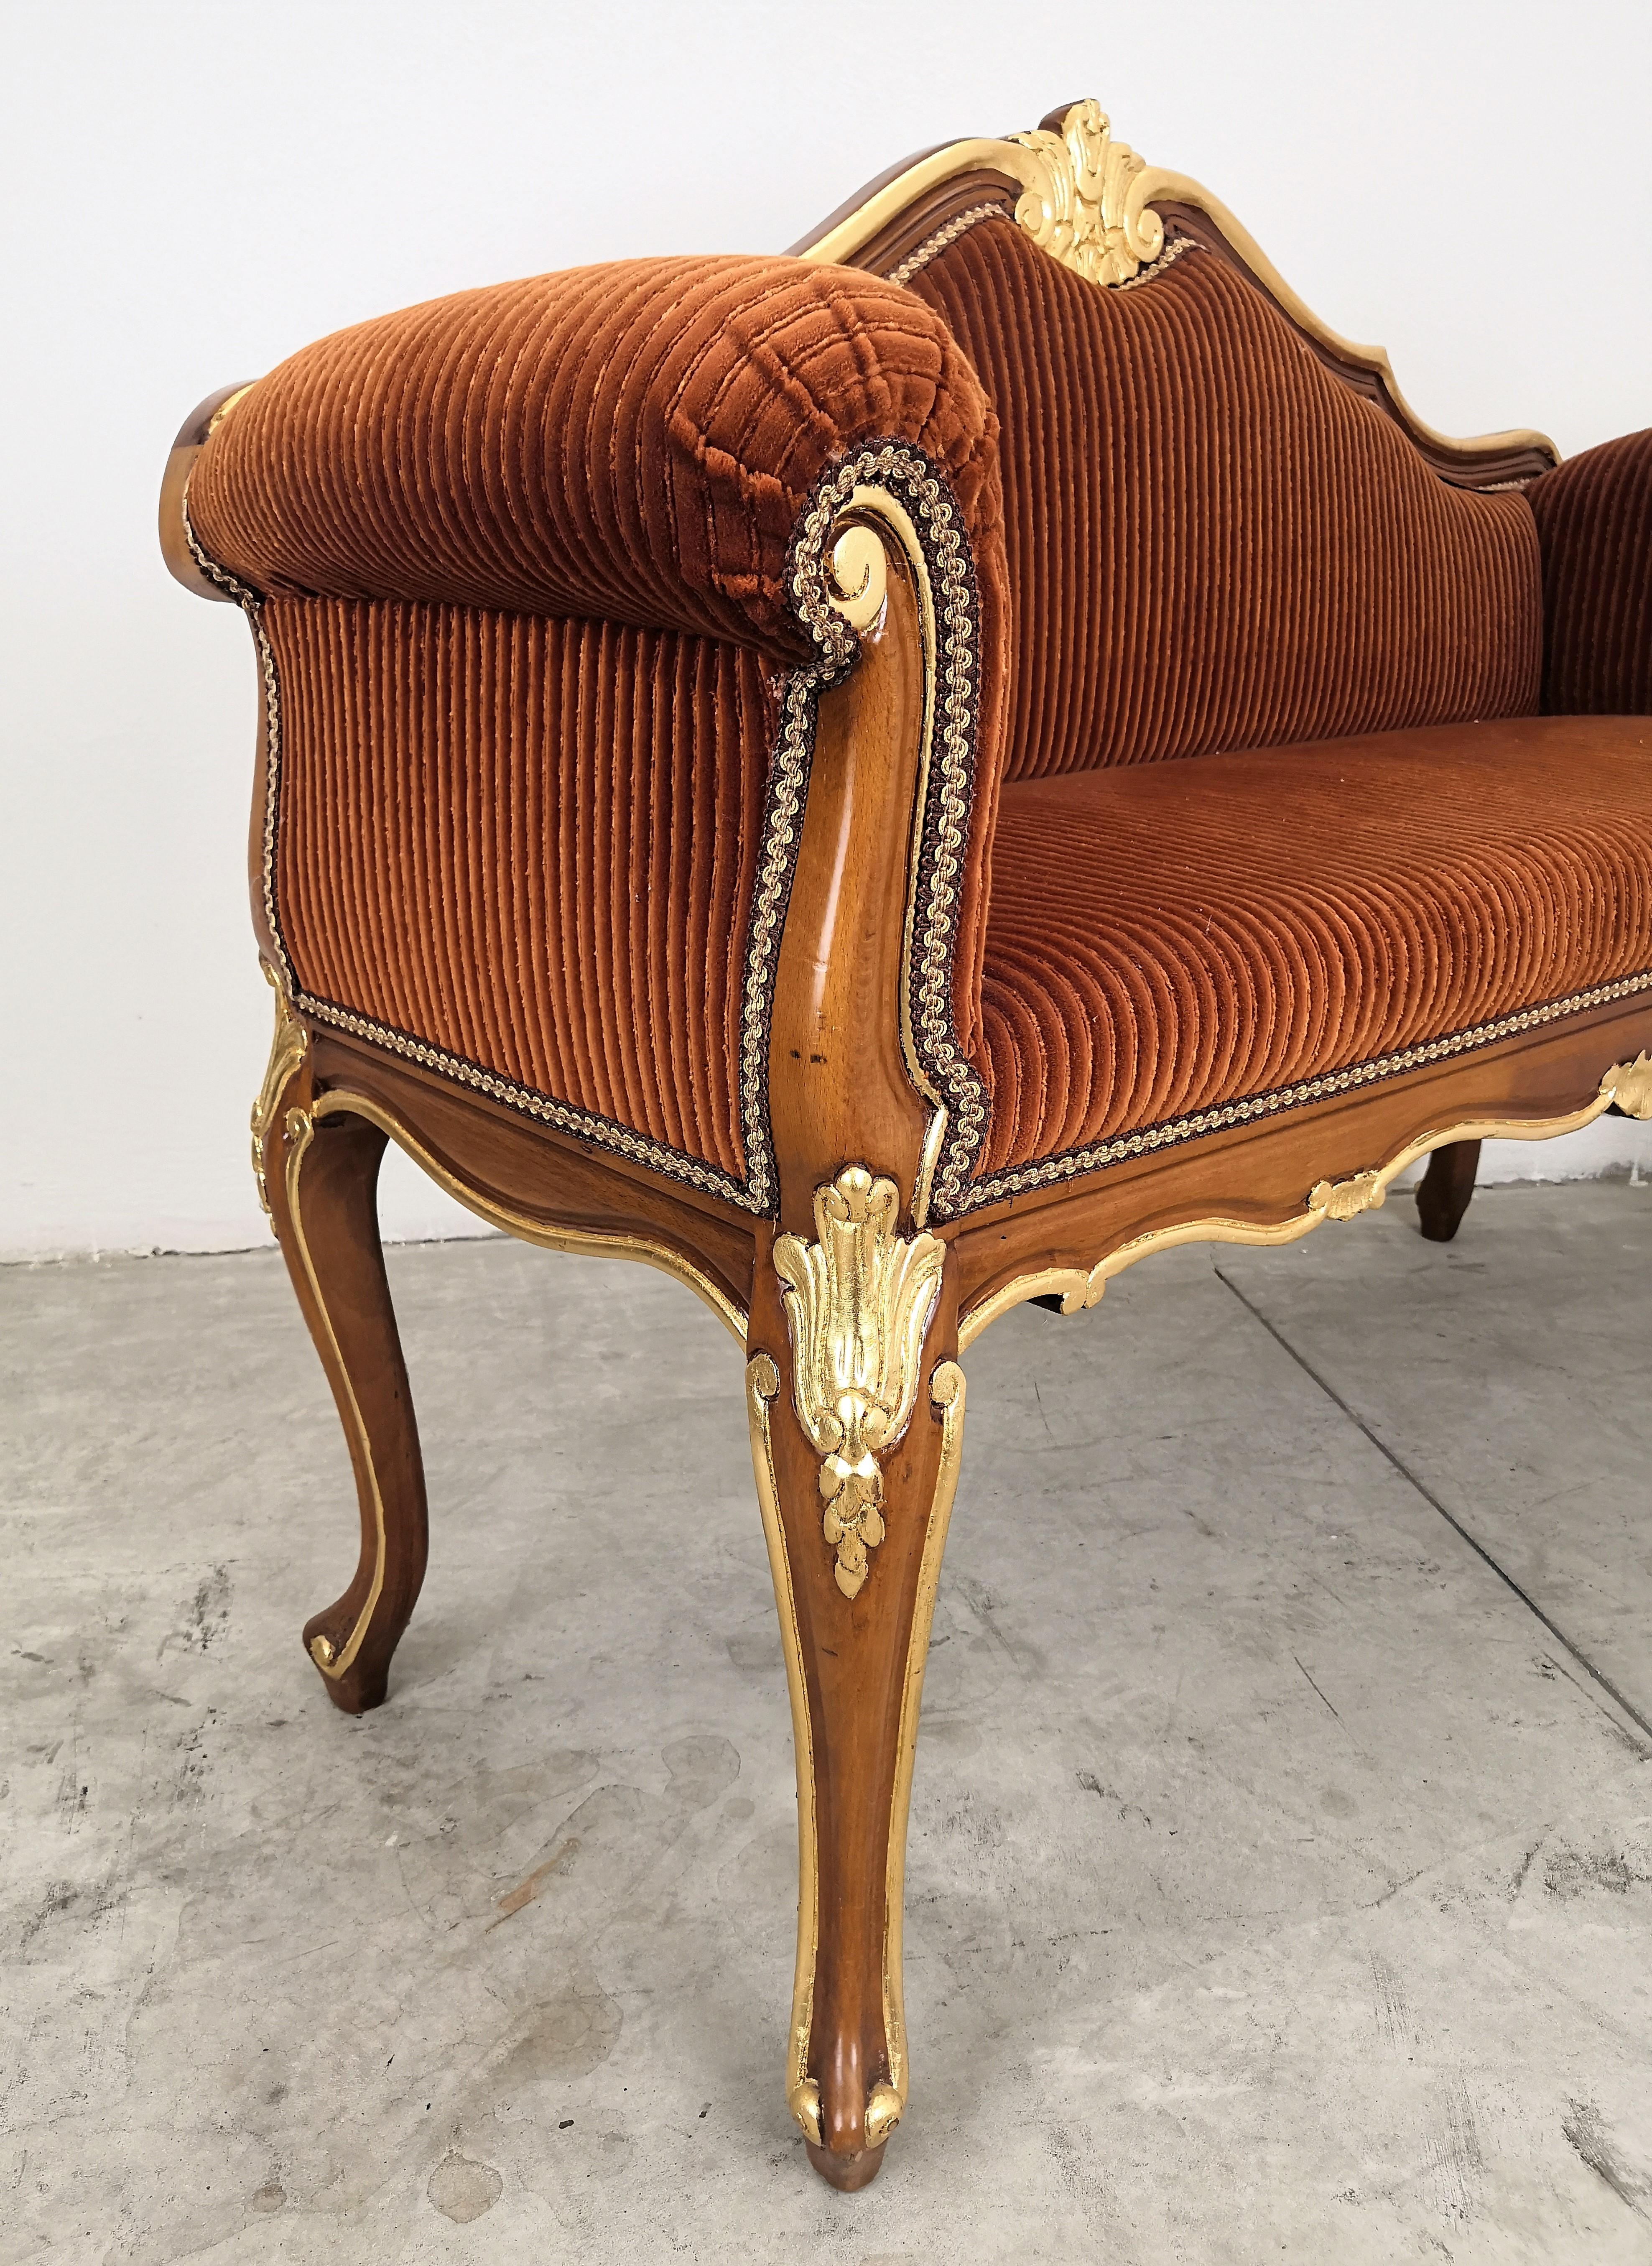 Neoclassical Revival 20thCentury Italian Wooden Gold Leaf and Vevet Slim Hallway Entrance Settee Sofa